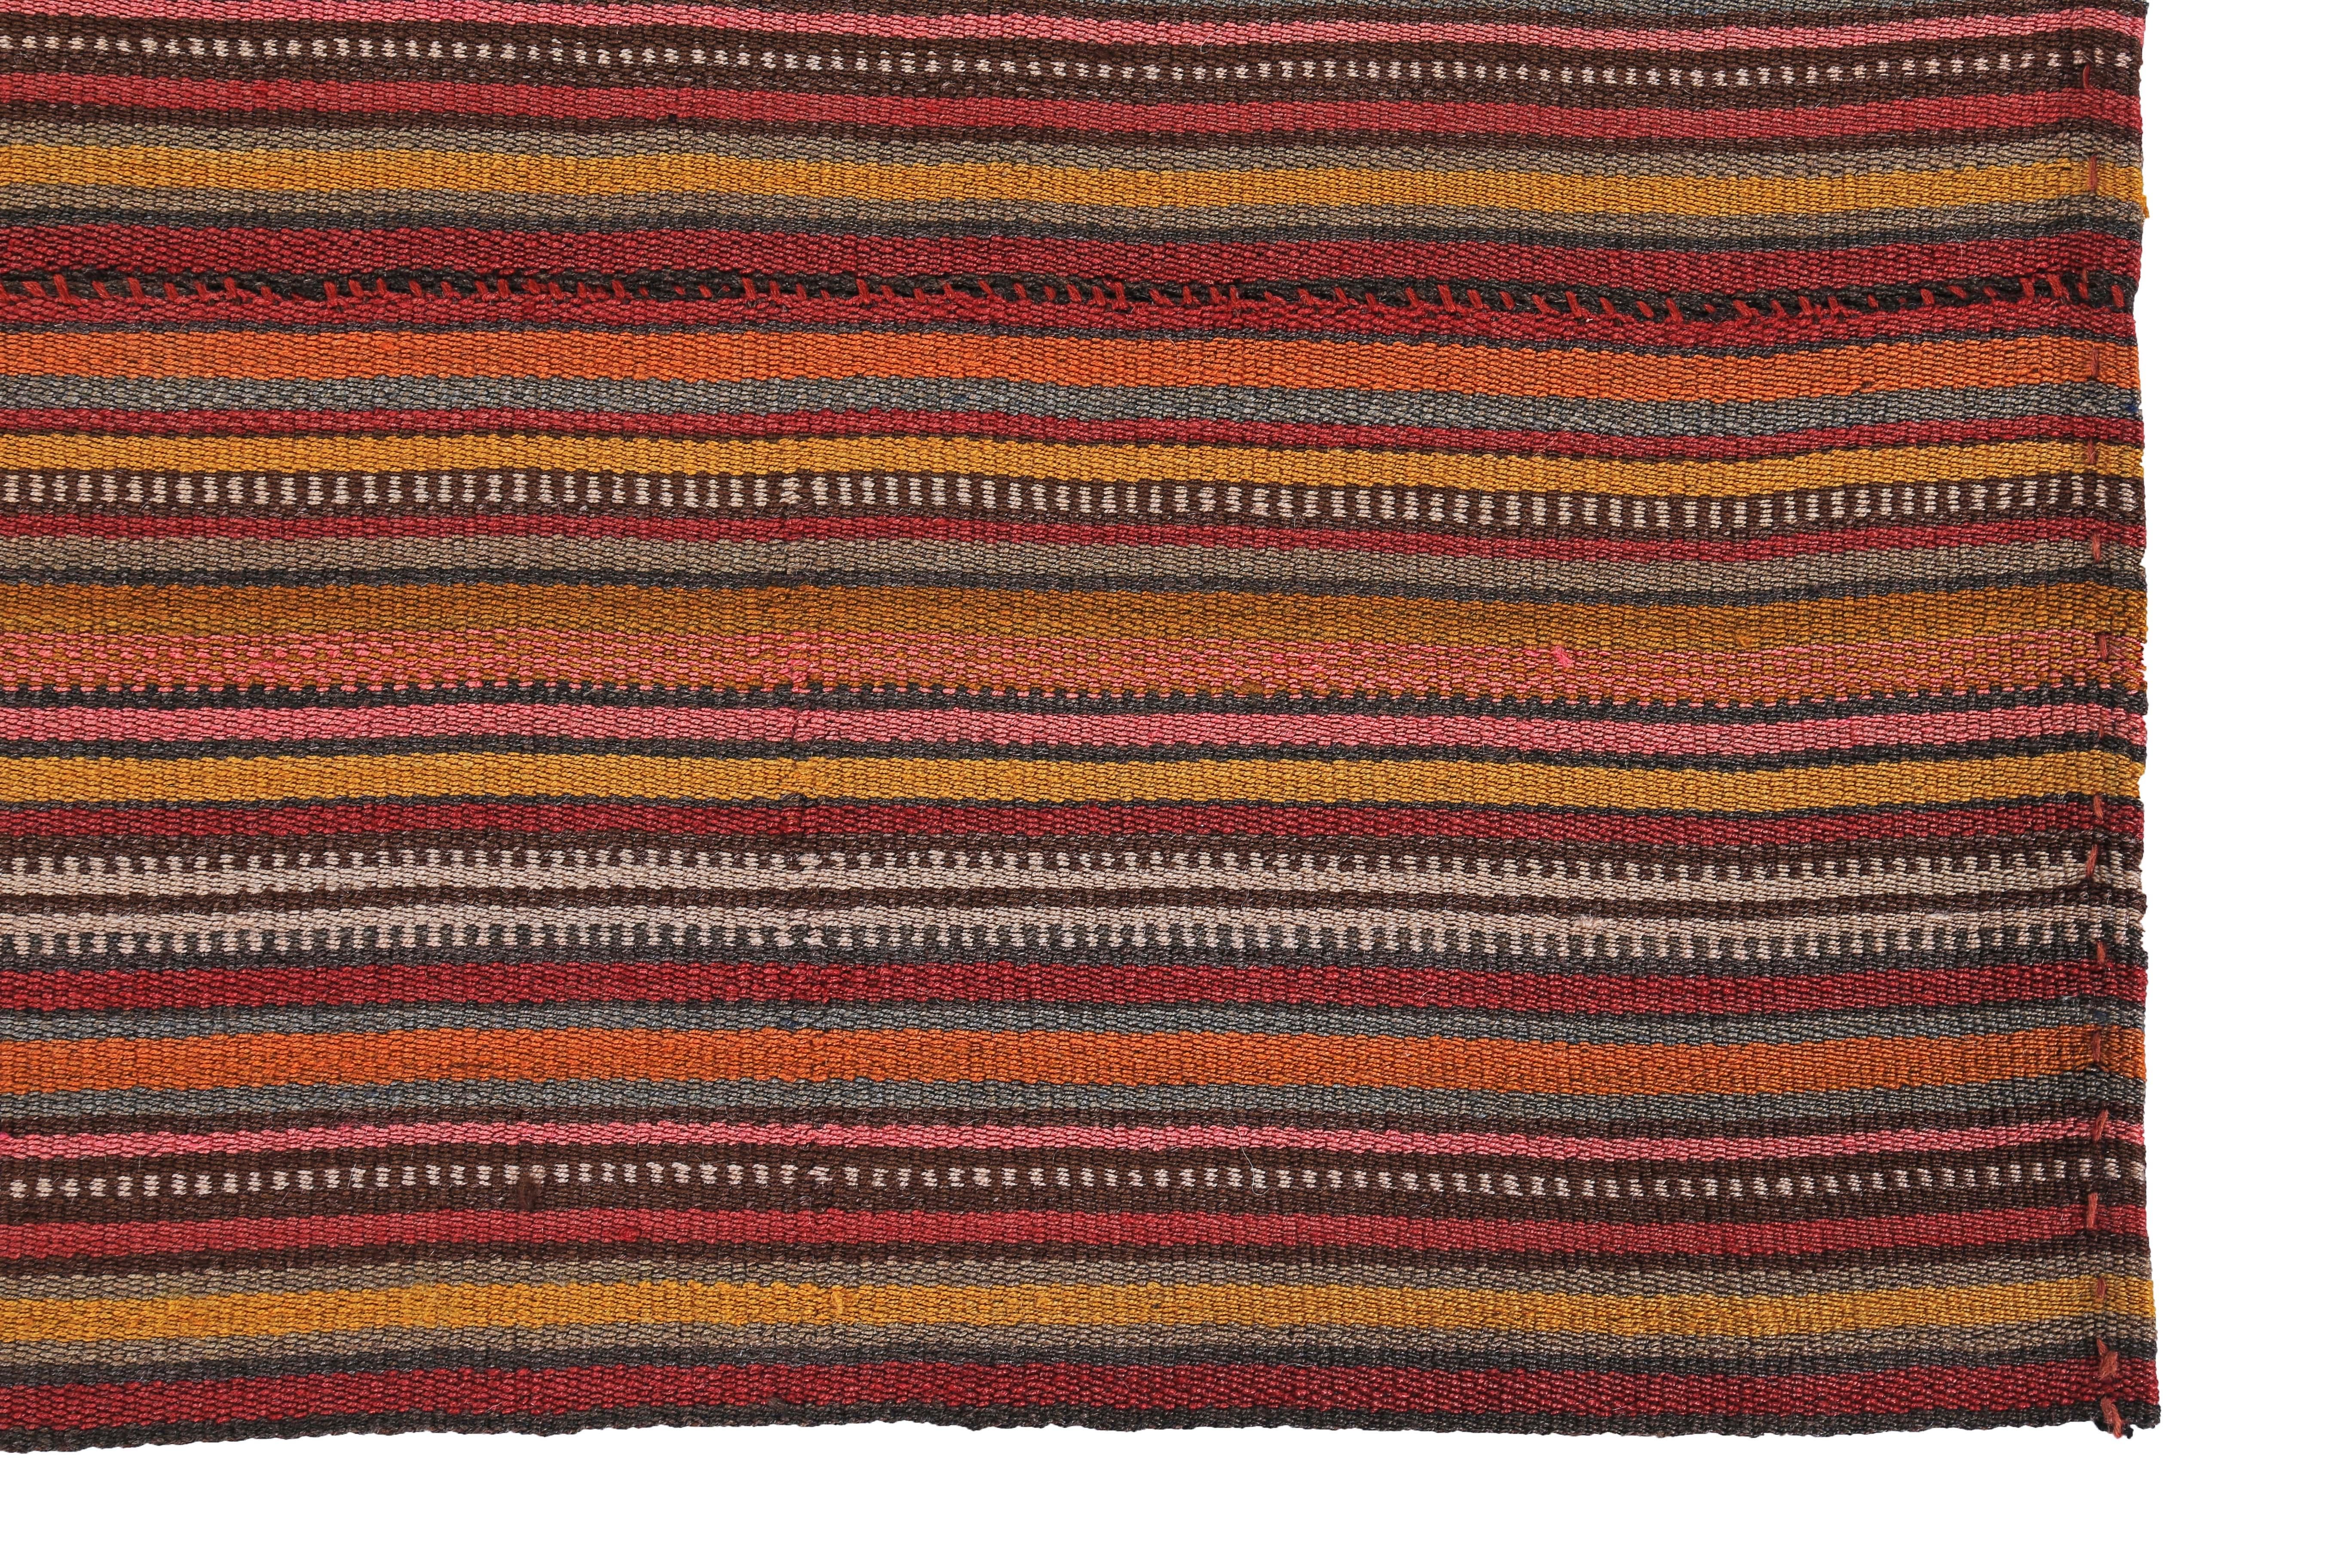 Hand-Woven Modern Turkish Kilim Rug with Orange, Red and Beige Pencil Stripes For Sale